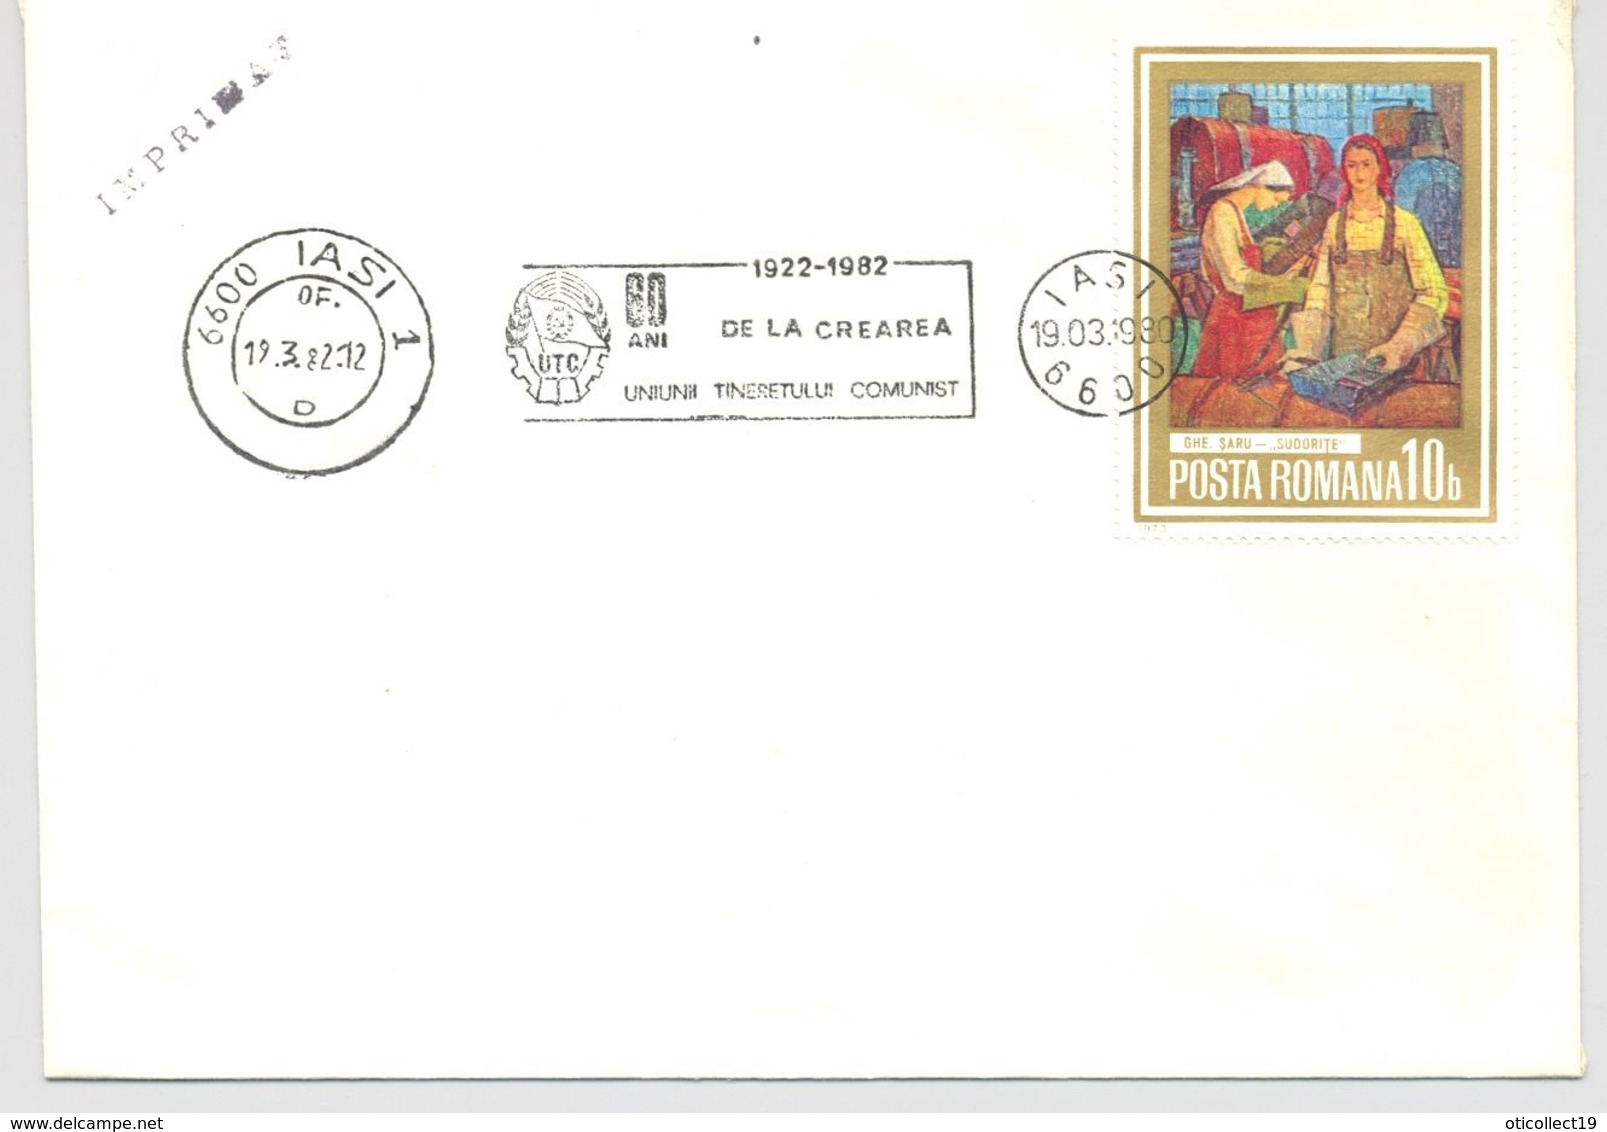 ROMANIAN YOUTH COMMUNIST ORGANIZATION ANNIVERSARY, SPECIAL POSTMARK ON COVER, PAINTING STAMP, 1982, ROMANIA - Covers & Documents